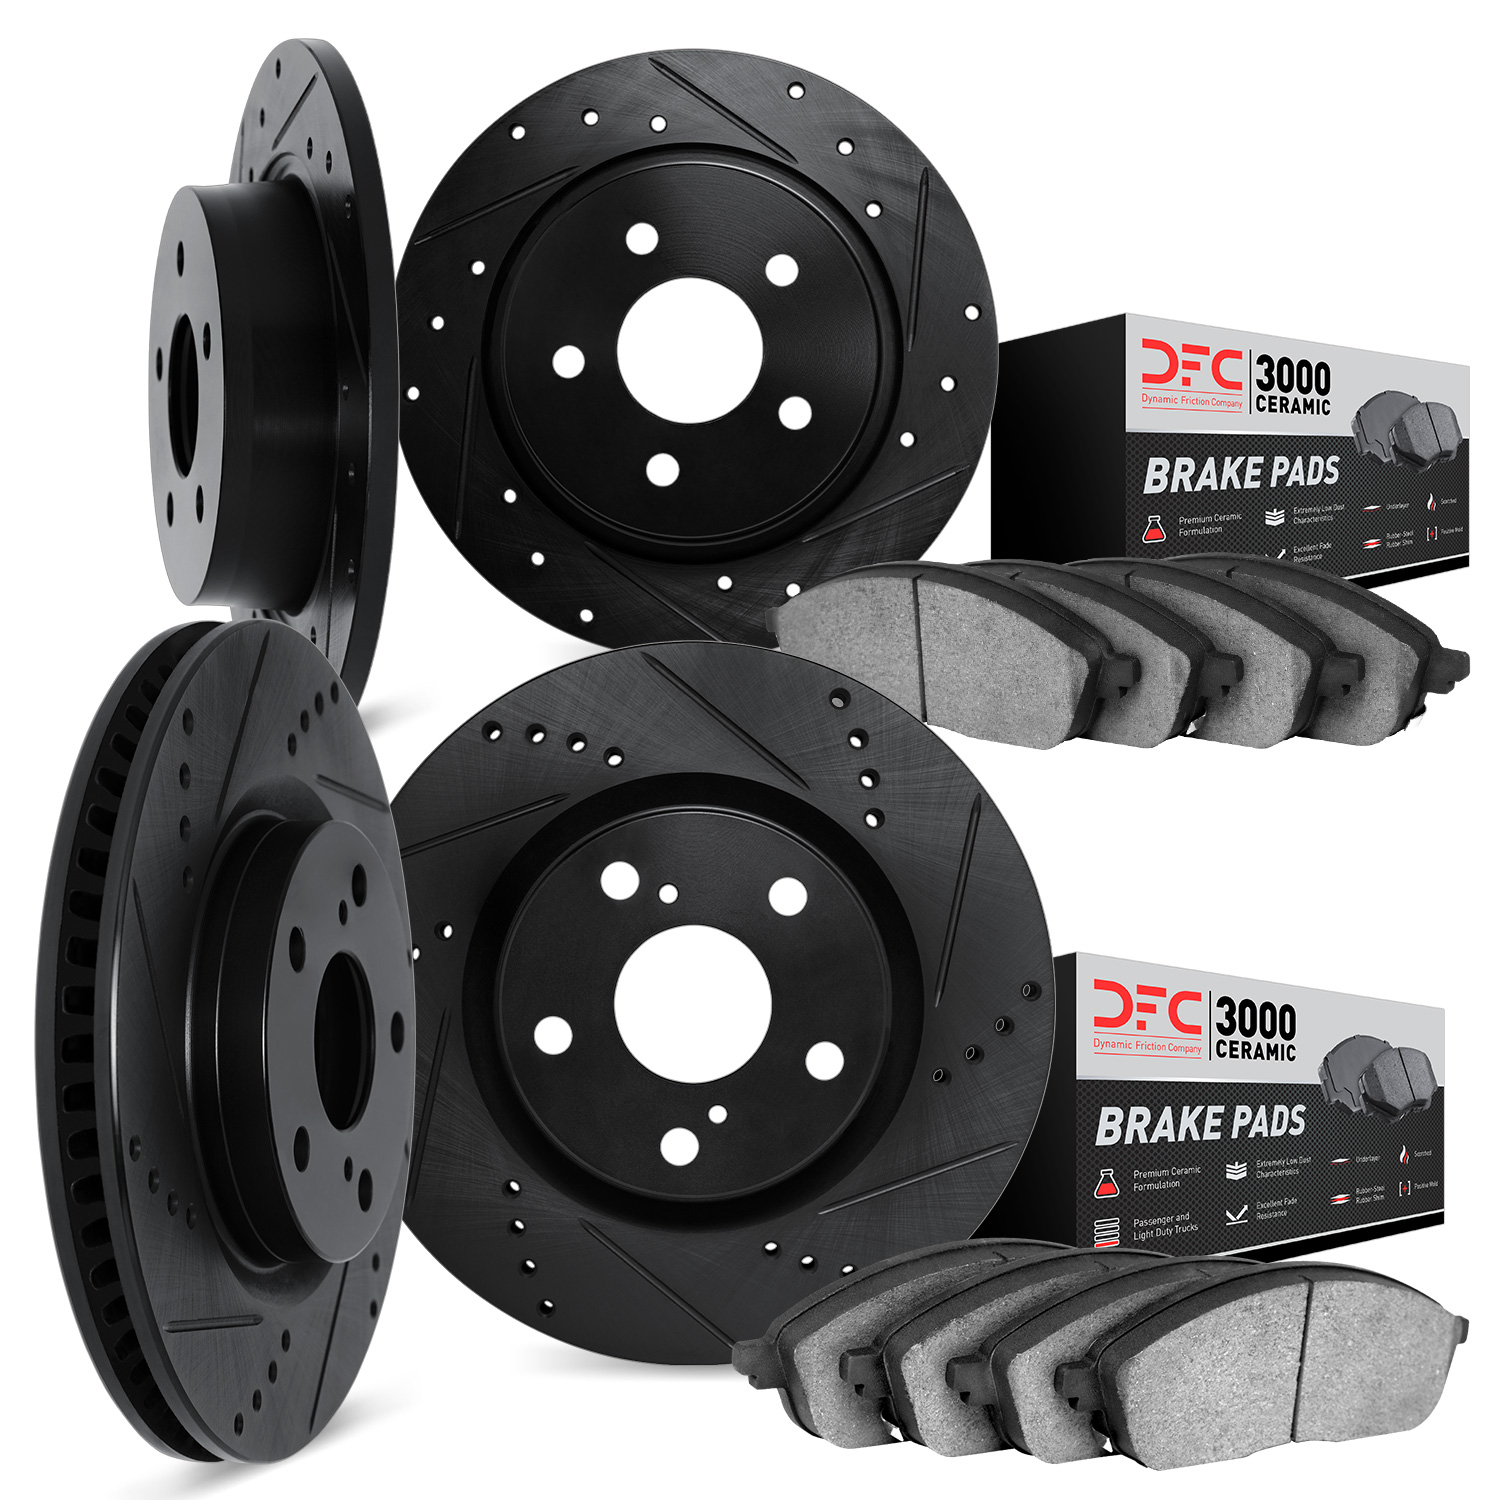 8304-72043 Drilled/Slotted Brake Rotors with 3000-Series Ceramic Brake Pads Kit [Black], 2004-2011 Mitsubishi, Position: Front a